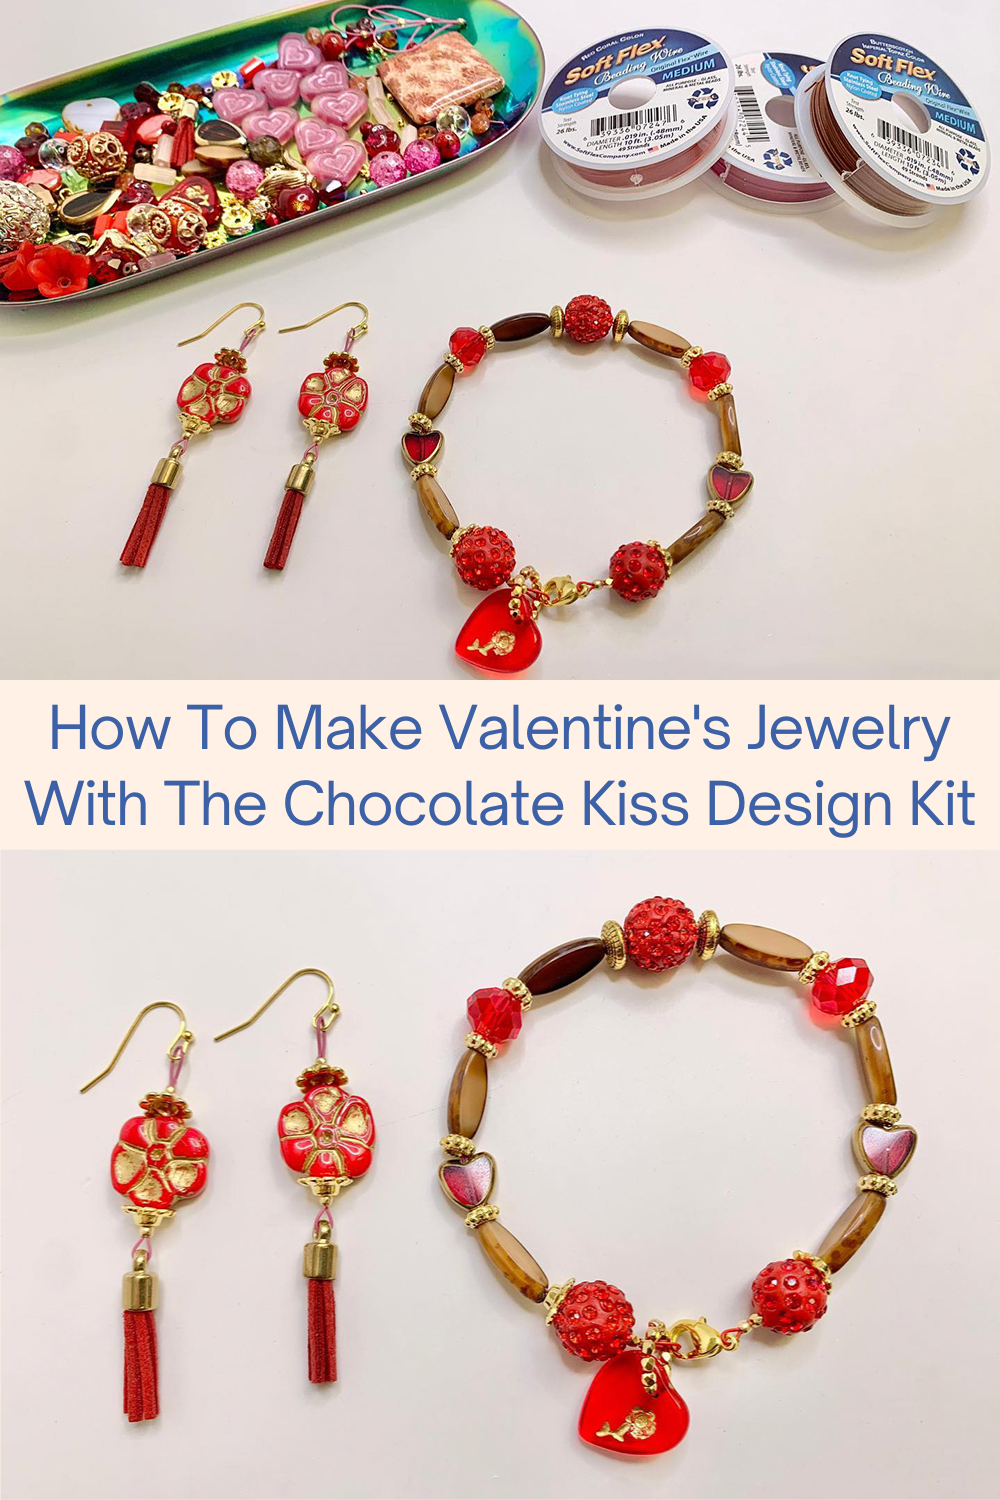 How To Make Valentine's Jewelry With The Chocolate Kiss Design Kit Collage